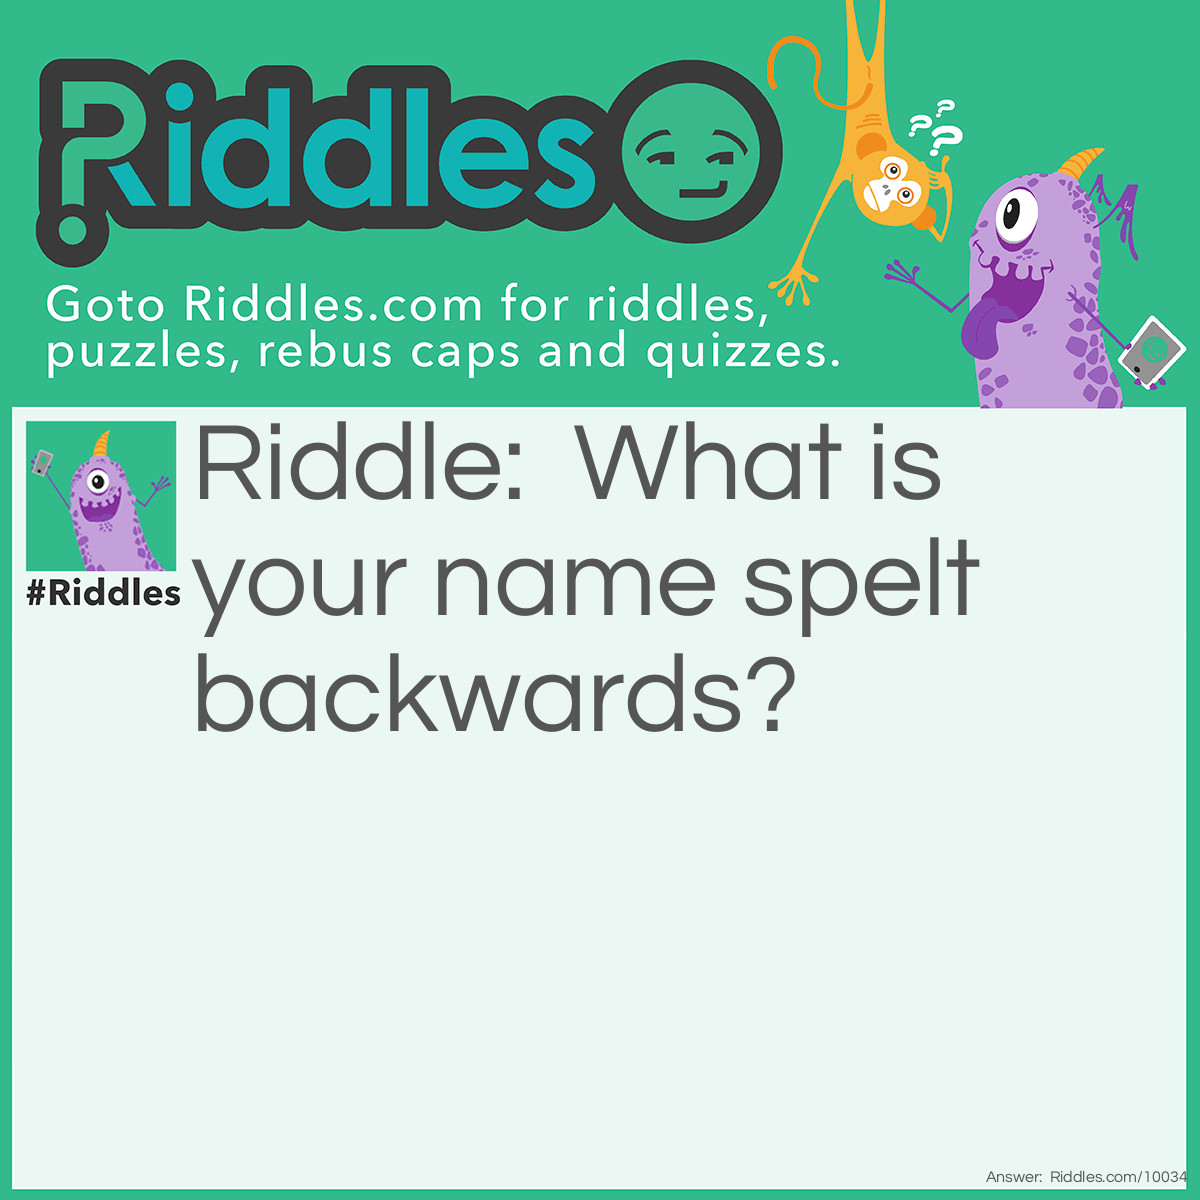 Riddle: What is your name spelt backwards? Answer: eman ruoy.